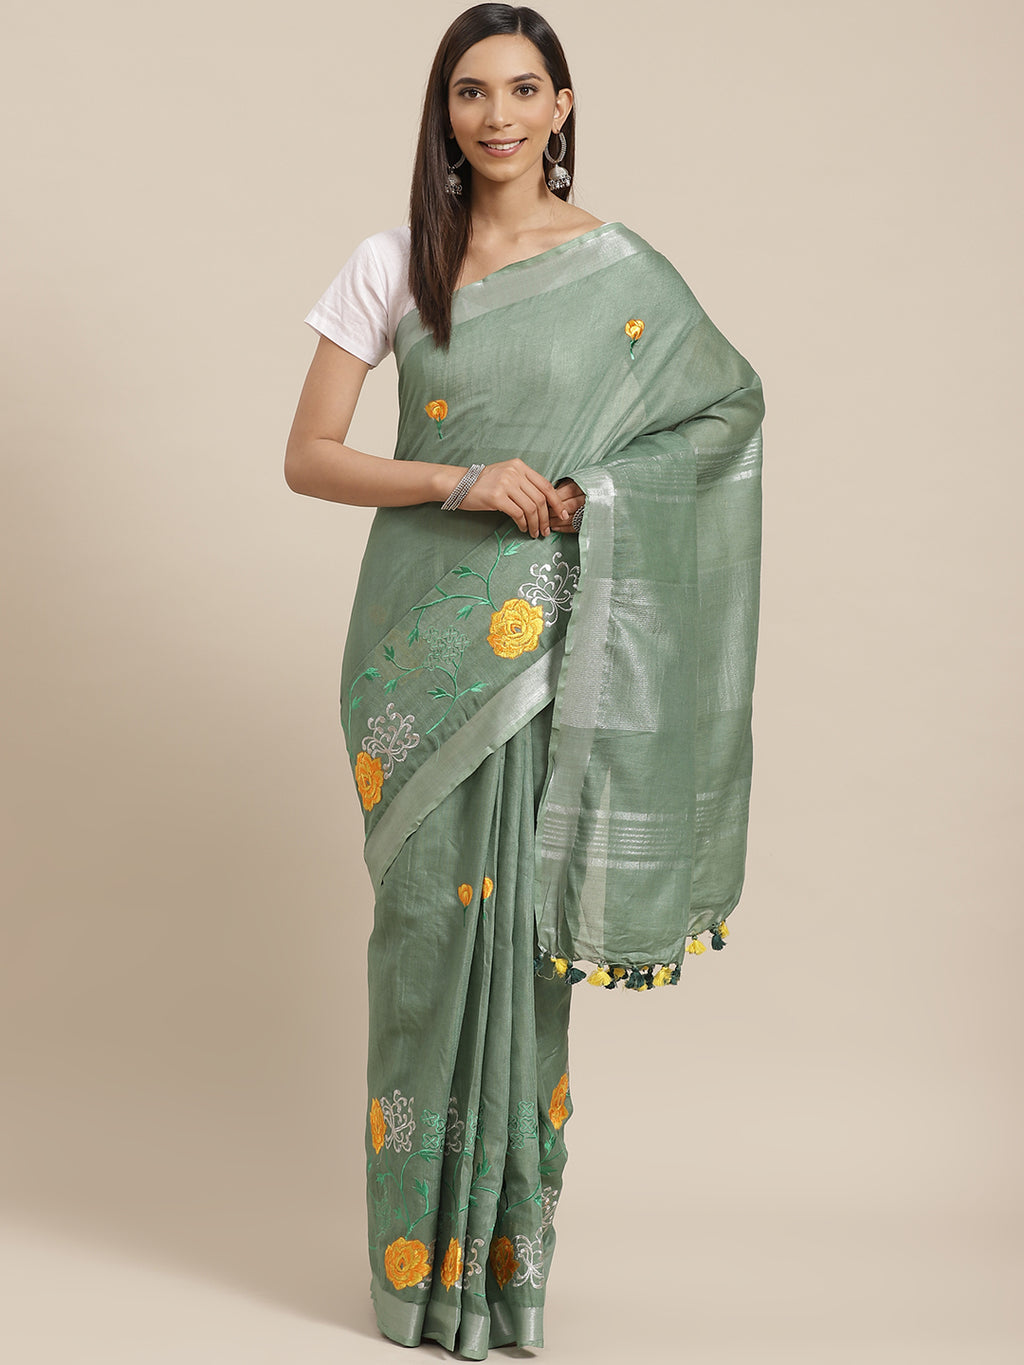 Olive and White, Kalakari India Linen Handwoven Saree and Blouse ALBGSA0082-Saree-Kalakari India-ALBGSA0082-Cotton, Geographical Indication, Hand Crafted, Heritage Prints, Linen, Natural Dyes, Red, Sarees, Shibori, Sustainable Fabrics, Woven, Yellow-[Linen,Ethnic,wear,Fashionista,Handloom,Handicraft,Indigo,blockprint,block,print,Cotton,Chanderi,Blue, latest,classy,party,bollywood,trendy,summer,style,traditional,formal,elegant,unique,style,hand,block,print, dabu,booti,gift,present,glamorous,affor